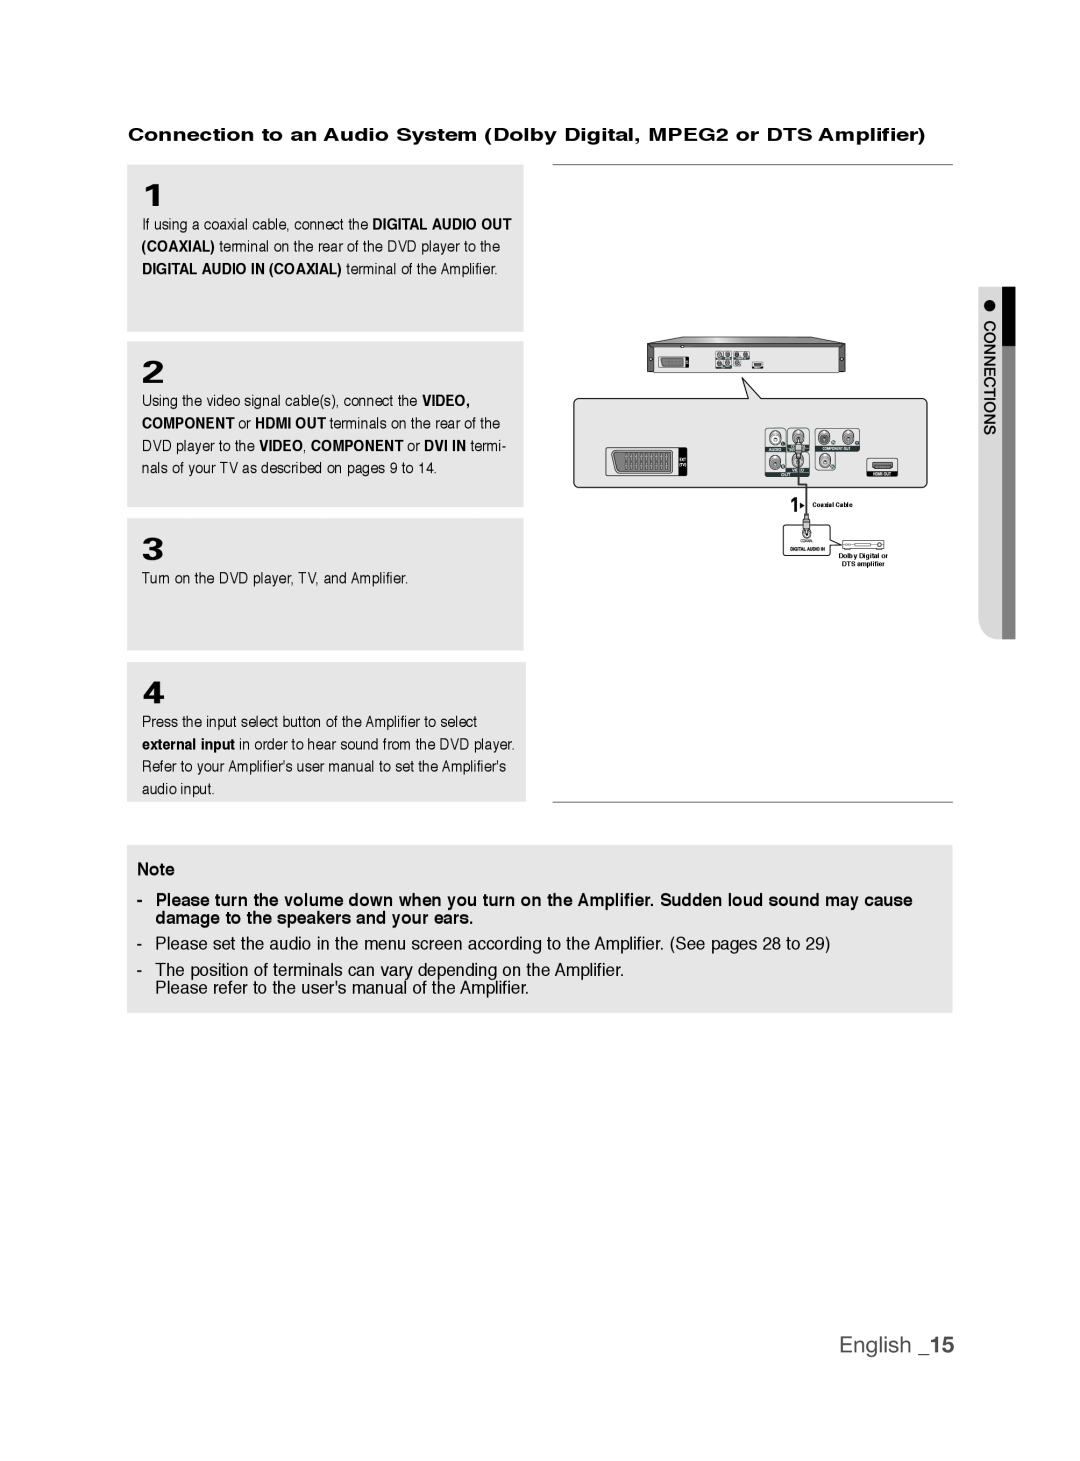 Samsung DVD-1080P9/XER manual Connection to an Audio System Dolby Digital, MPEG2 or DTS Amplifier, English, Coaxial Cable 